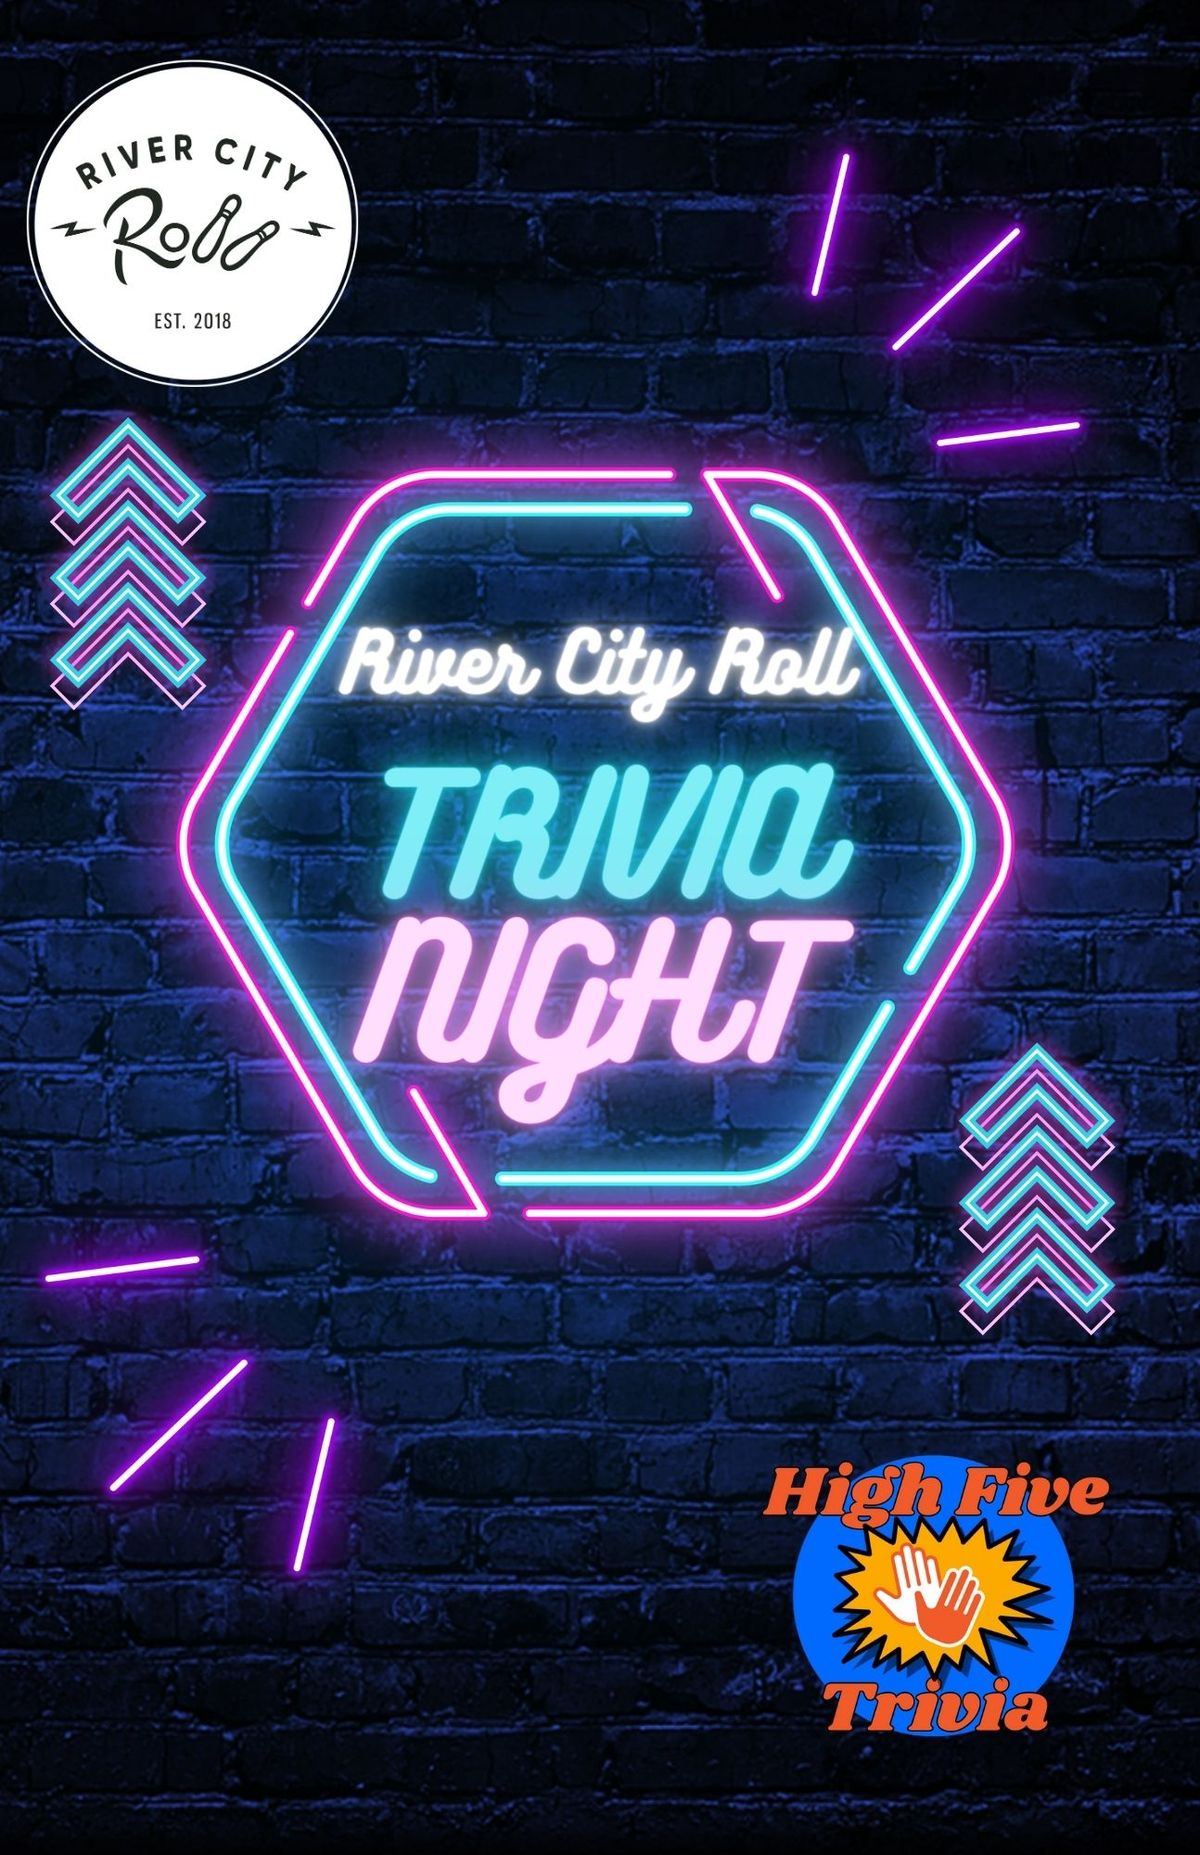 River City Roll Trivia Night - Every Wednesday of the Month!